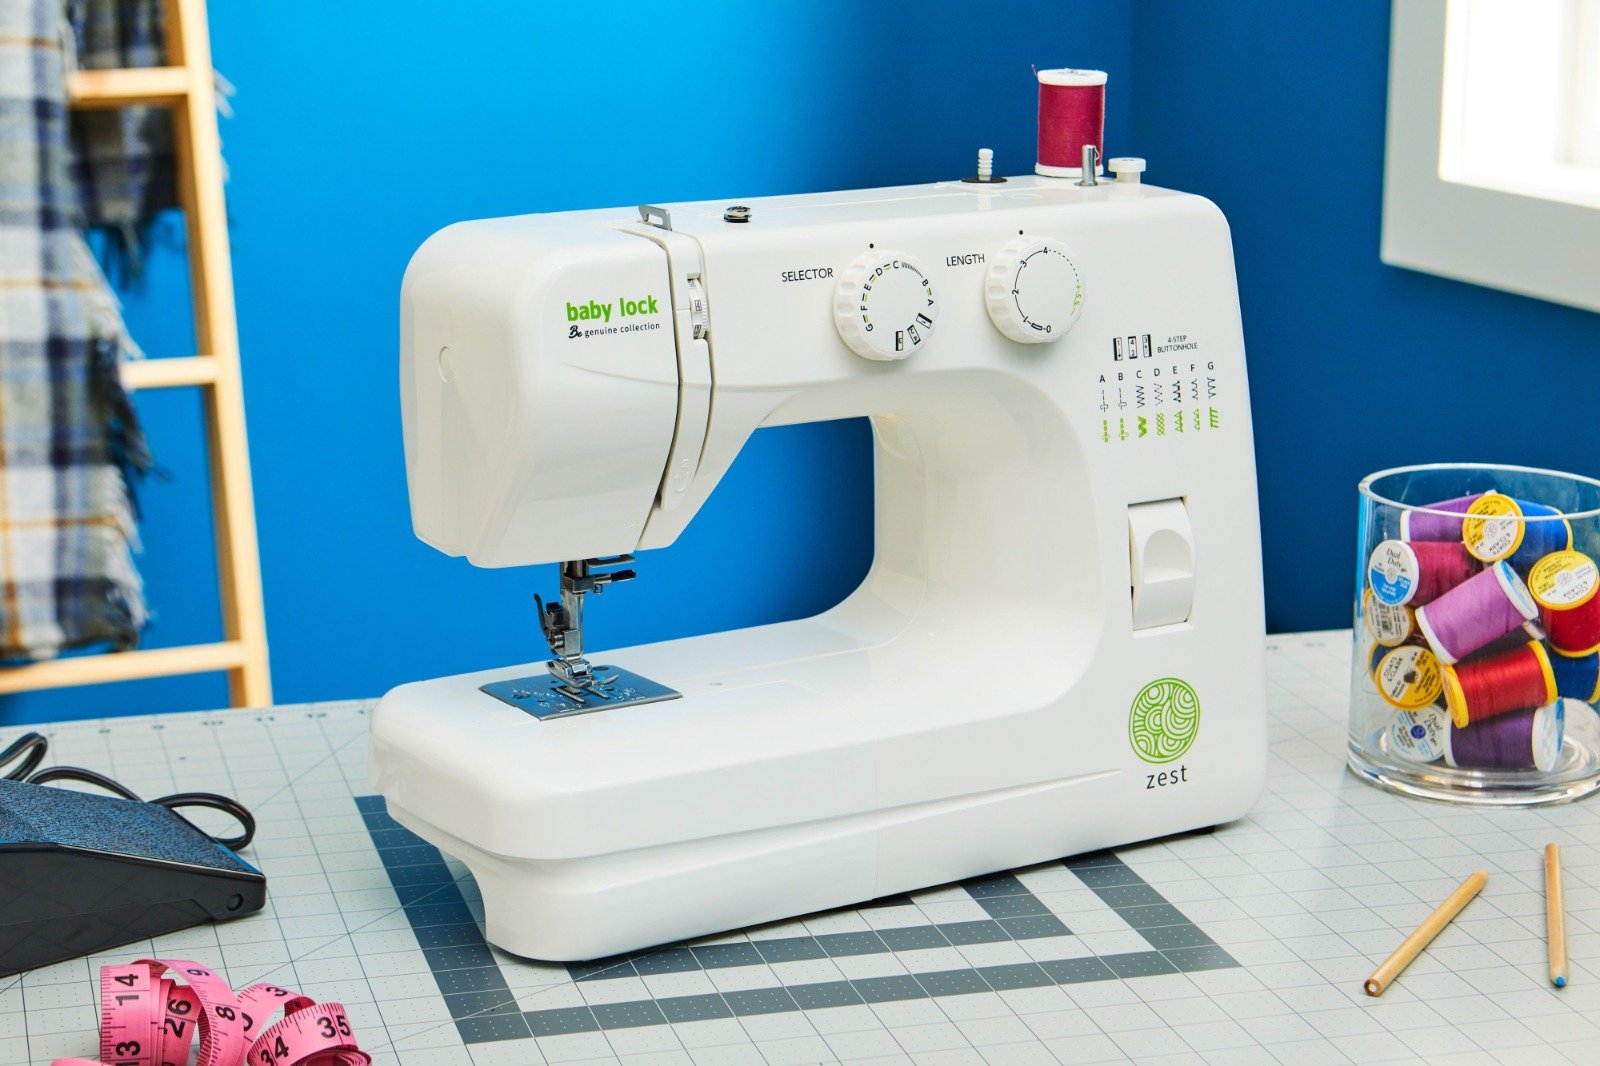 Sewing Machines: The Transition from Manual Operations to Highly Computed Precision